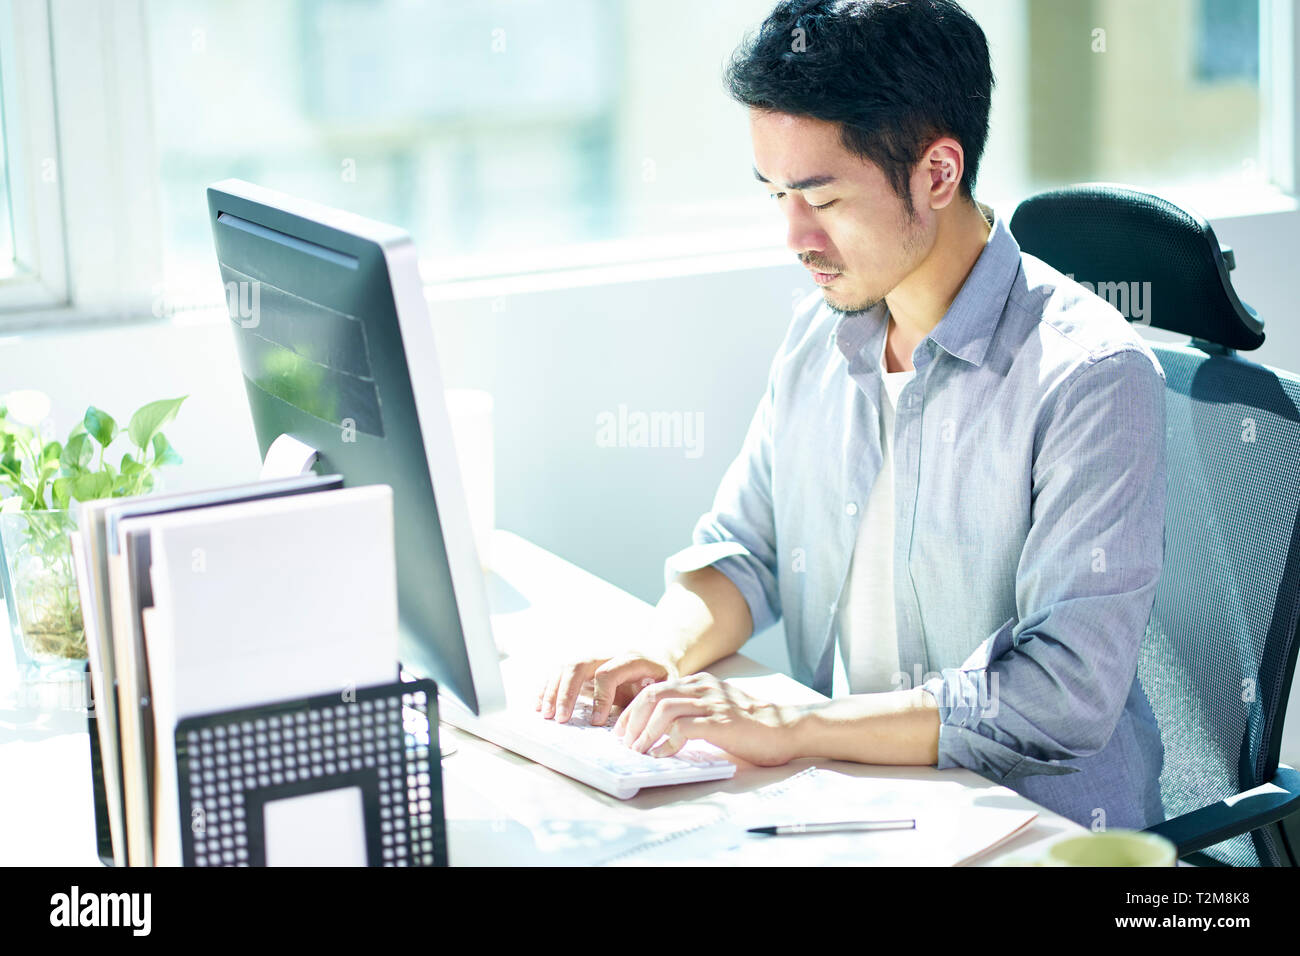 high angle view of a young asian businessman entrepreneur working in office using desktop computer. Stock Photo